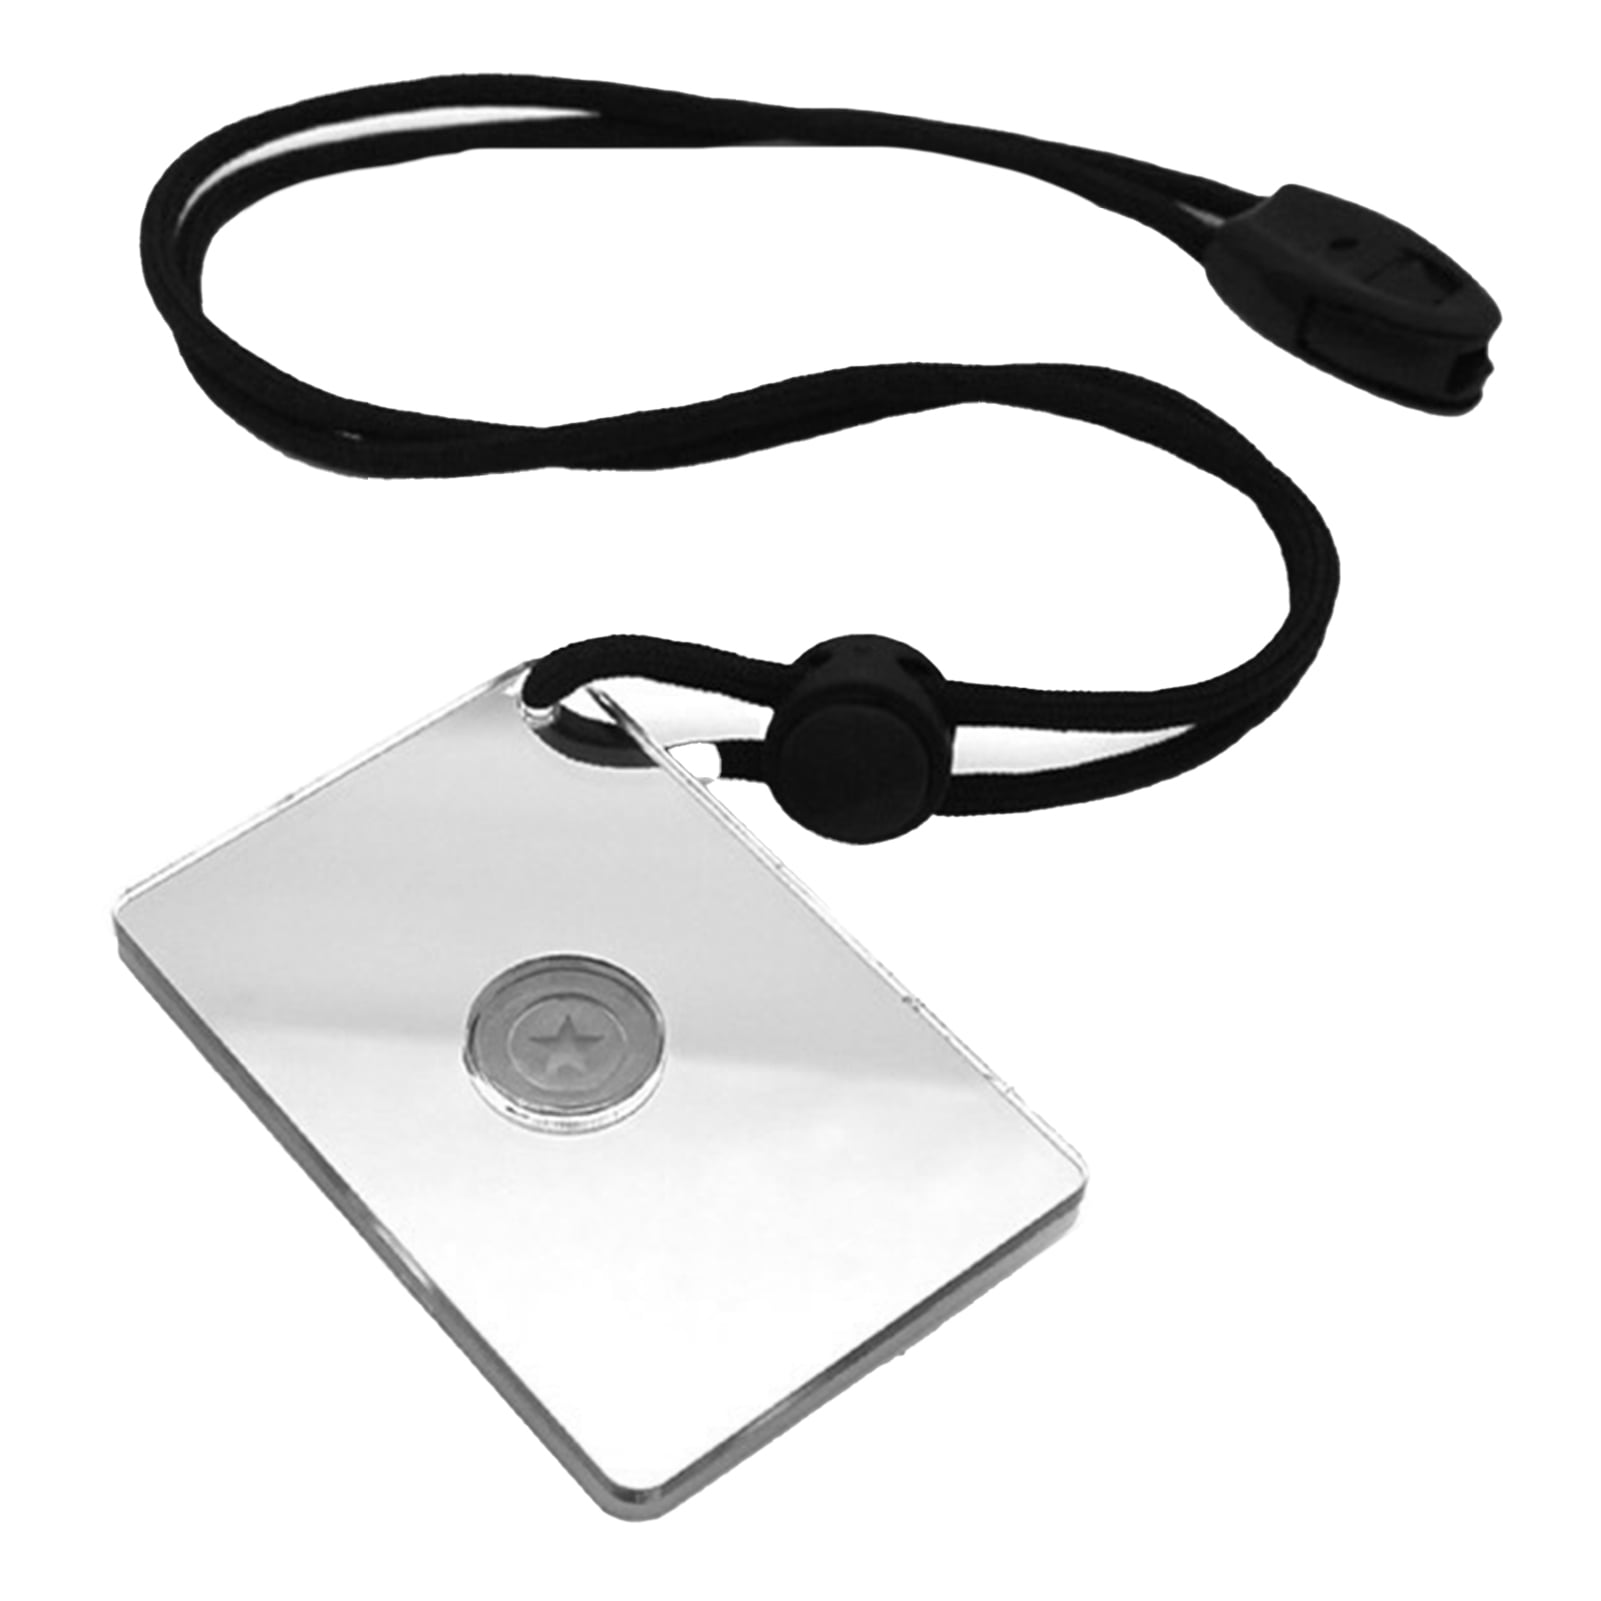 Alomejor Survival Signal Mirror 2 x 3 Inch Send Remotely Mirrors with  Lanyard for Outdoor Emergency Signal Mirror